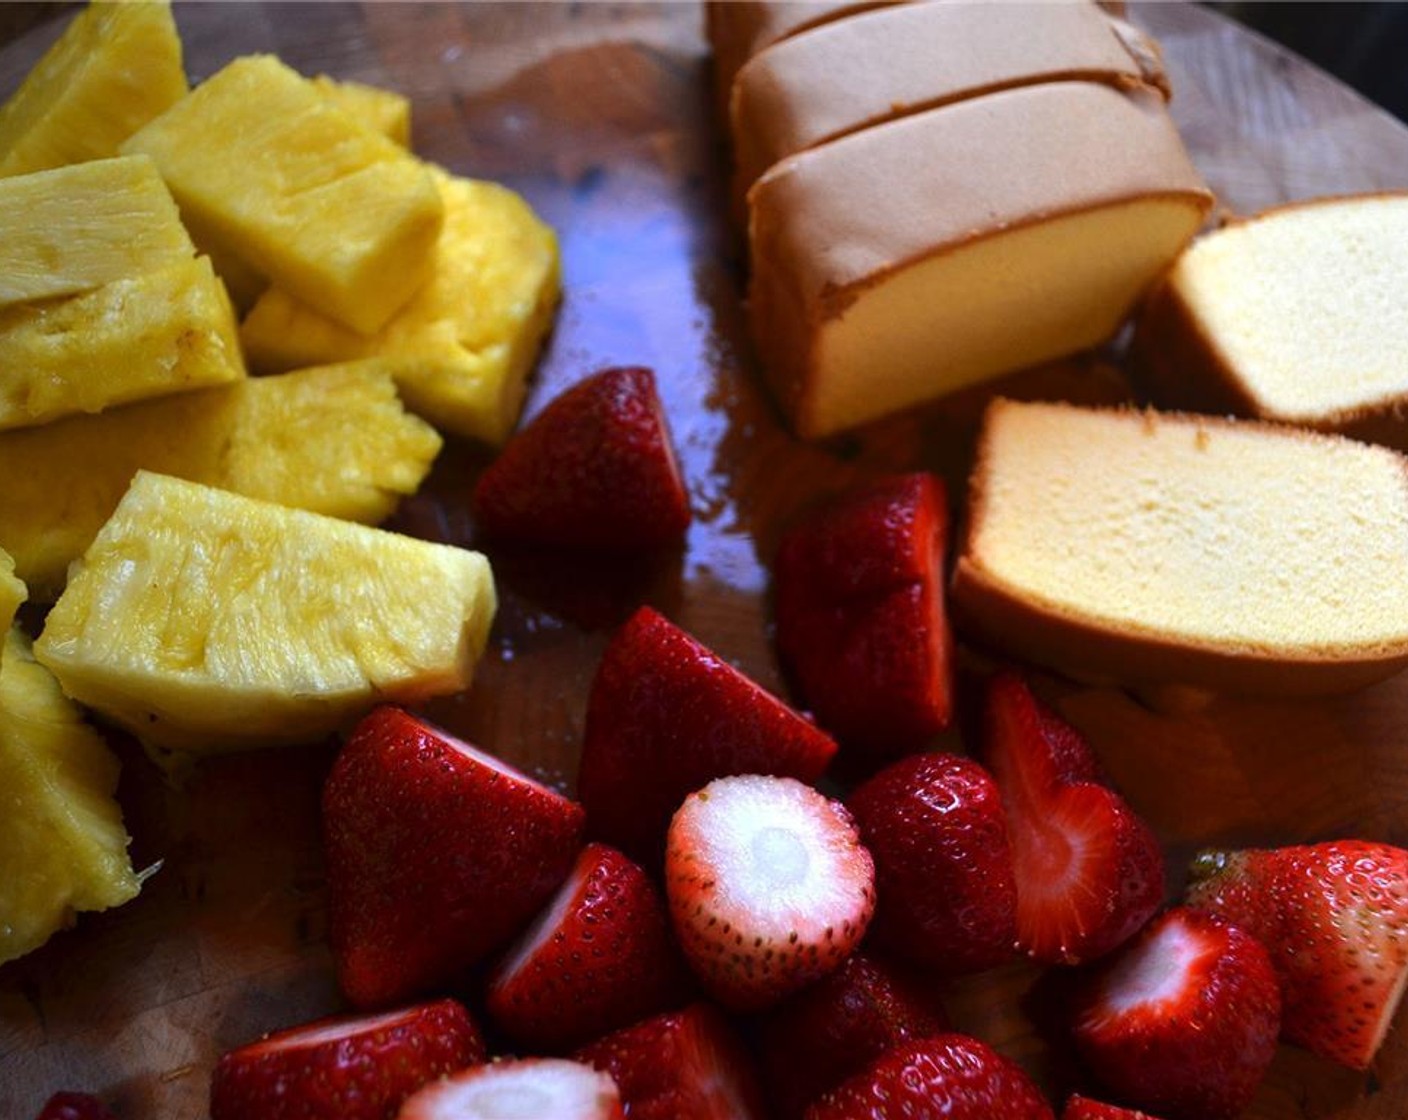 step 1 Preheat the grill and grate to medium-high heat. Chop the Fresh Strawberries (2 cups) and Pineapples (2 cups) into even-sized pieces and add to the skewers (8-10). Slice the Pound Cake (1) as desired.